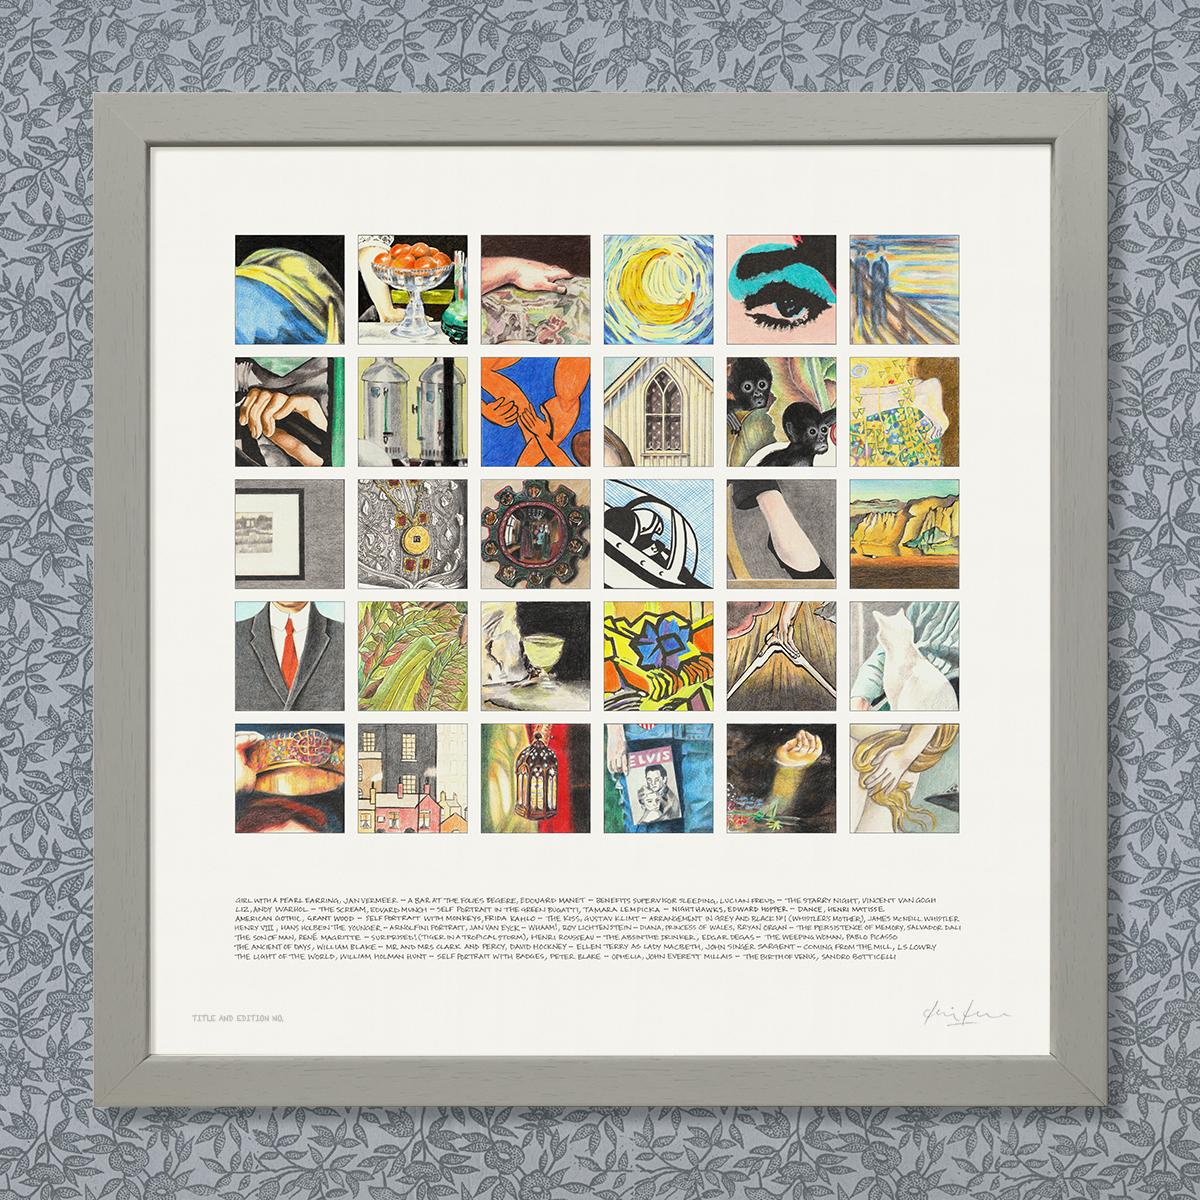 Limited edition print, a montage of drawn snippets from famous paintings, in a grey frame.